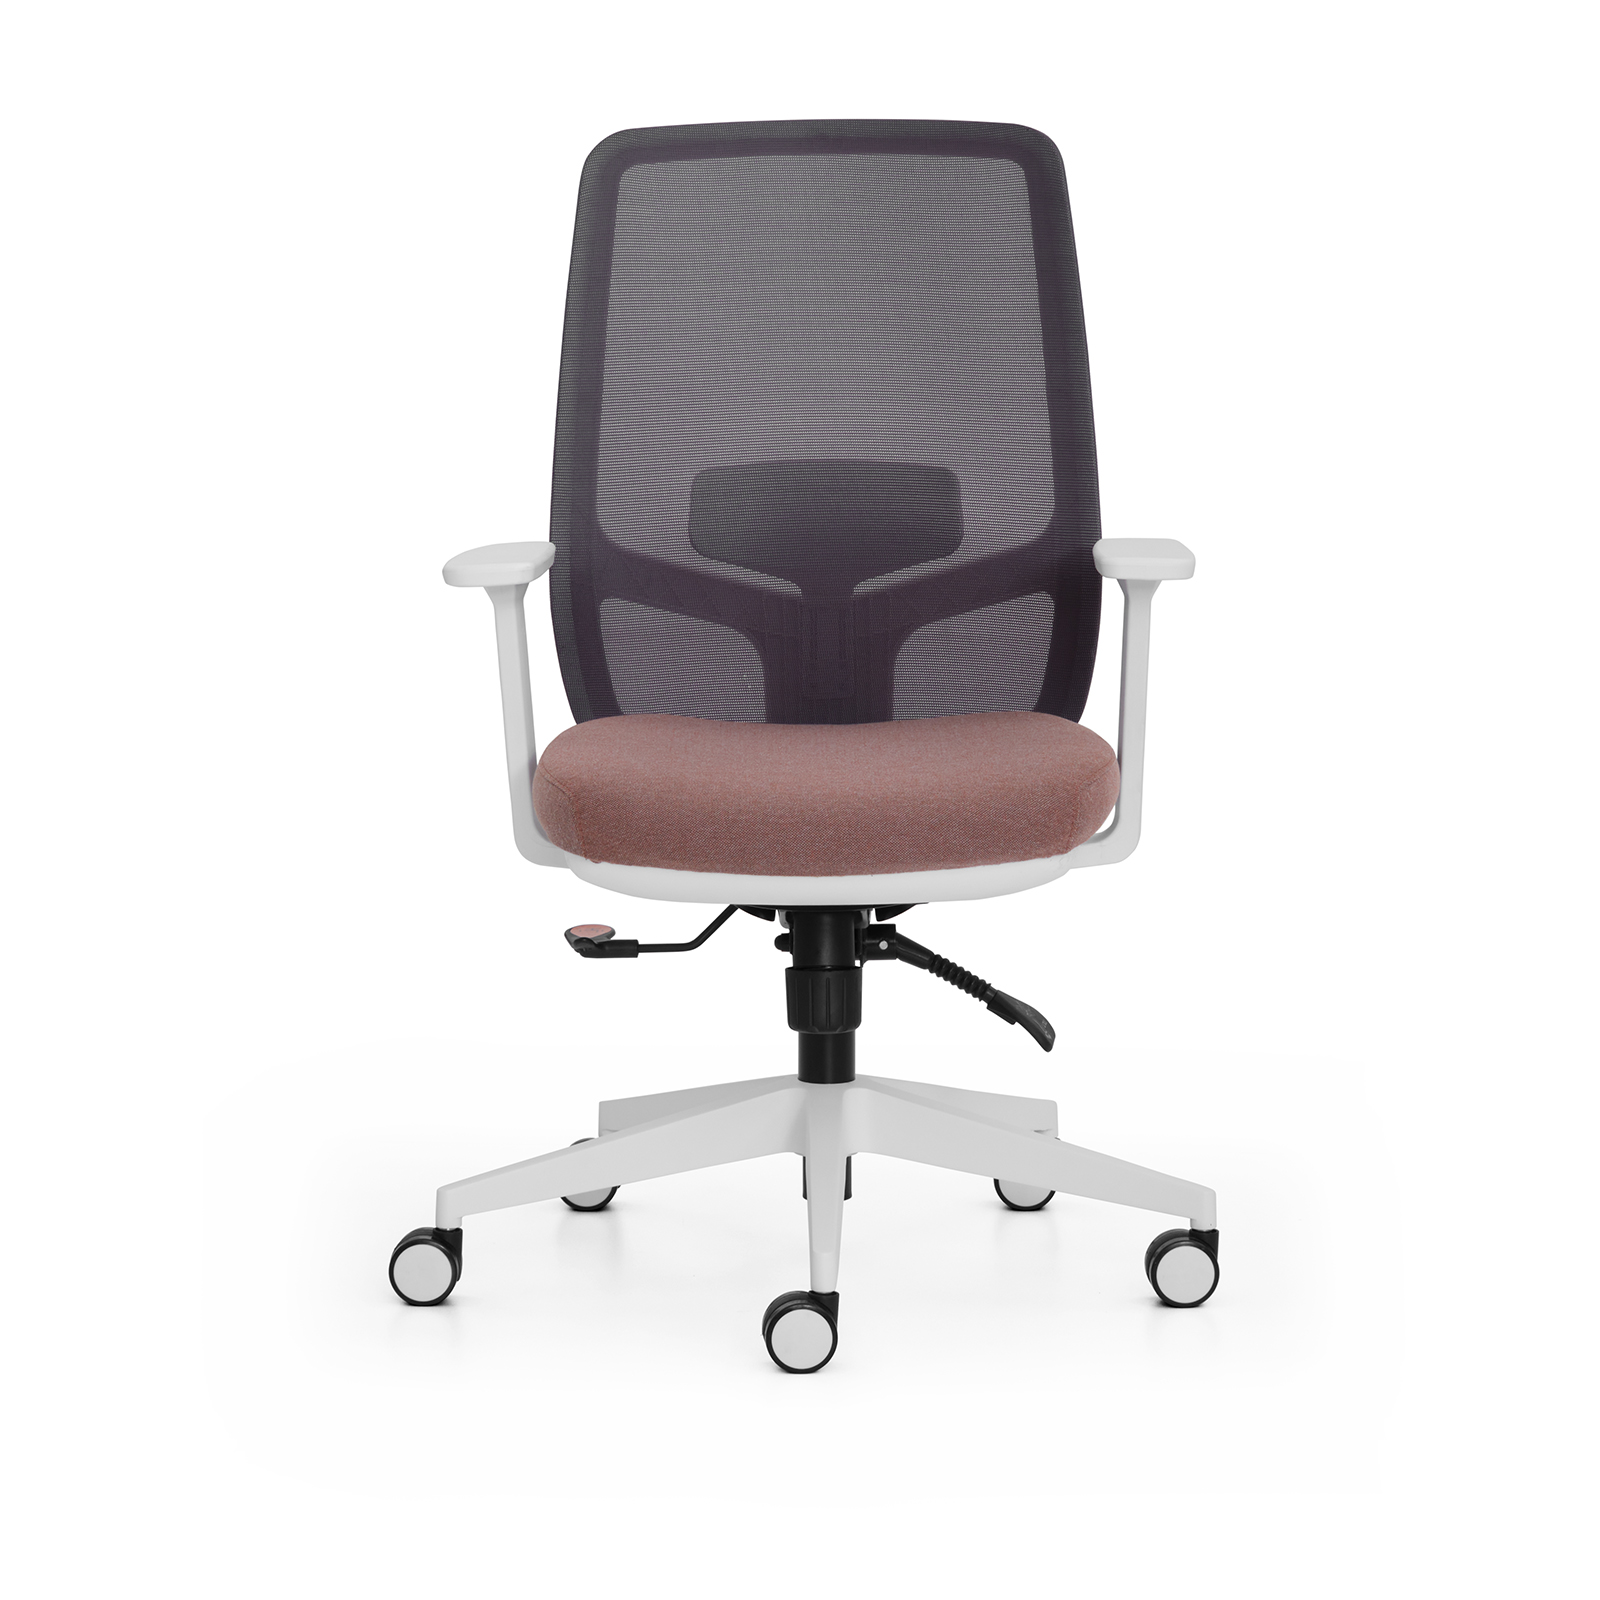 Tami White Office Chair 1